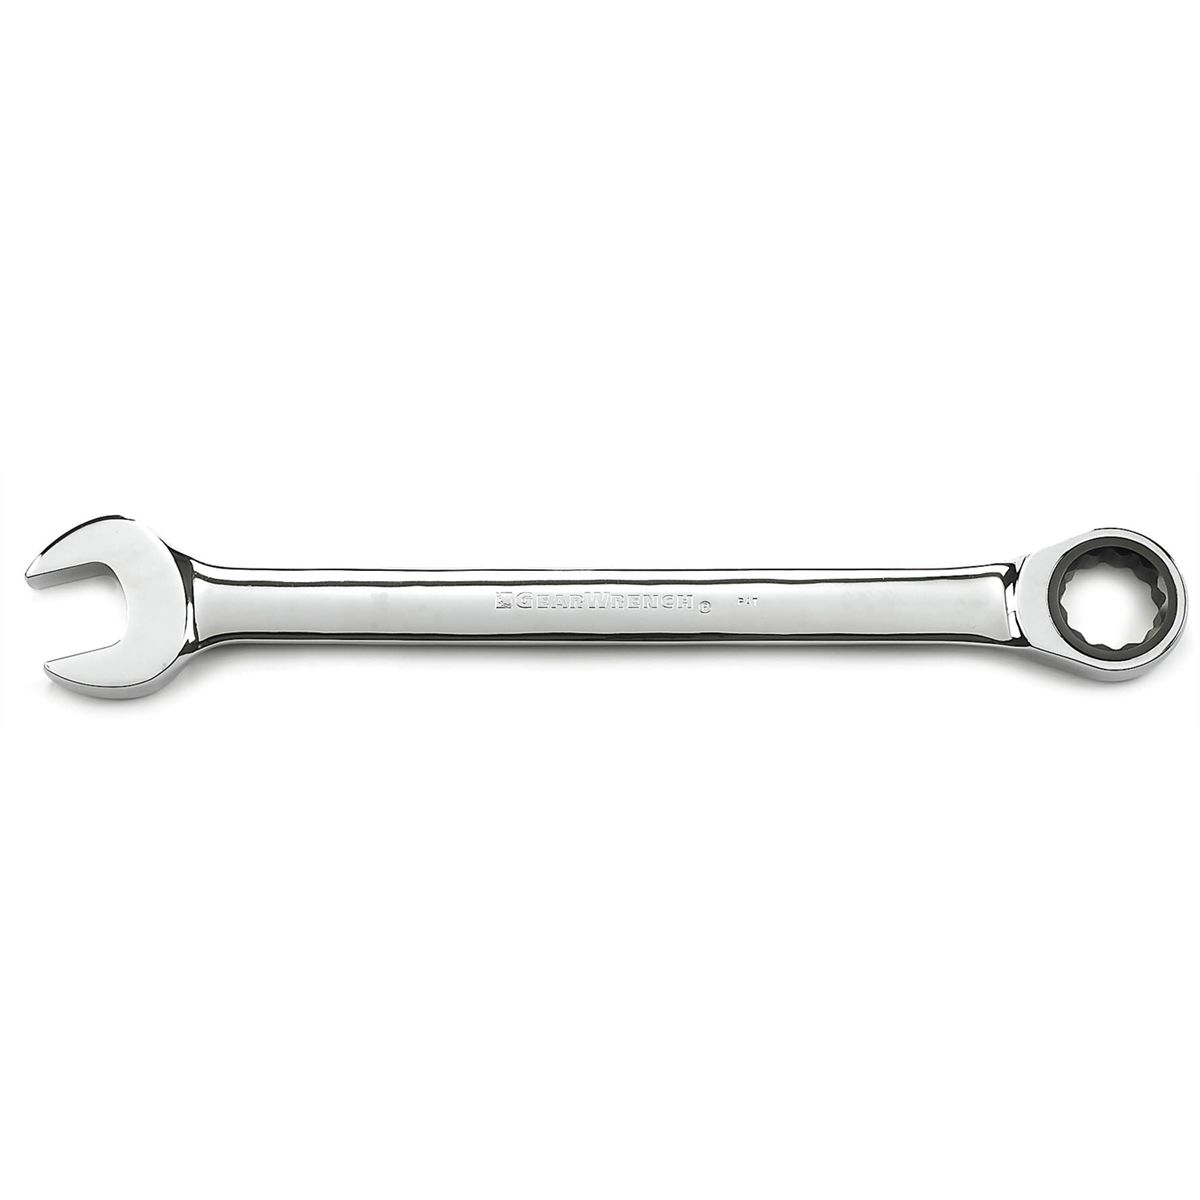 GearWrench “S” Shaped Ratchet Combination Spanner SALE 3/4″ x 7/8″ 